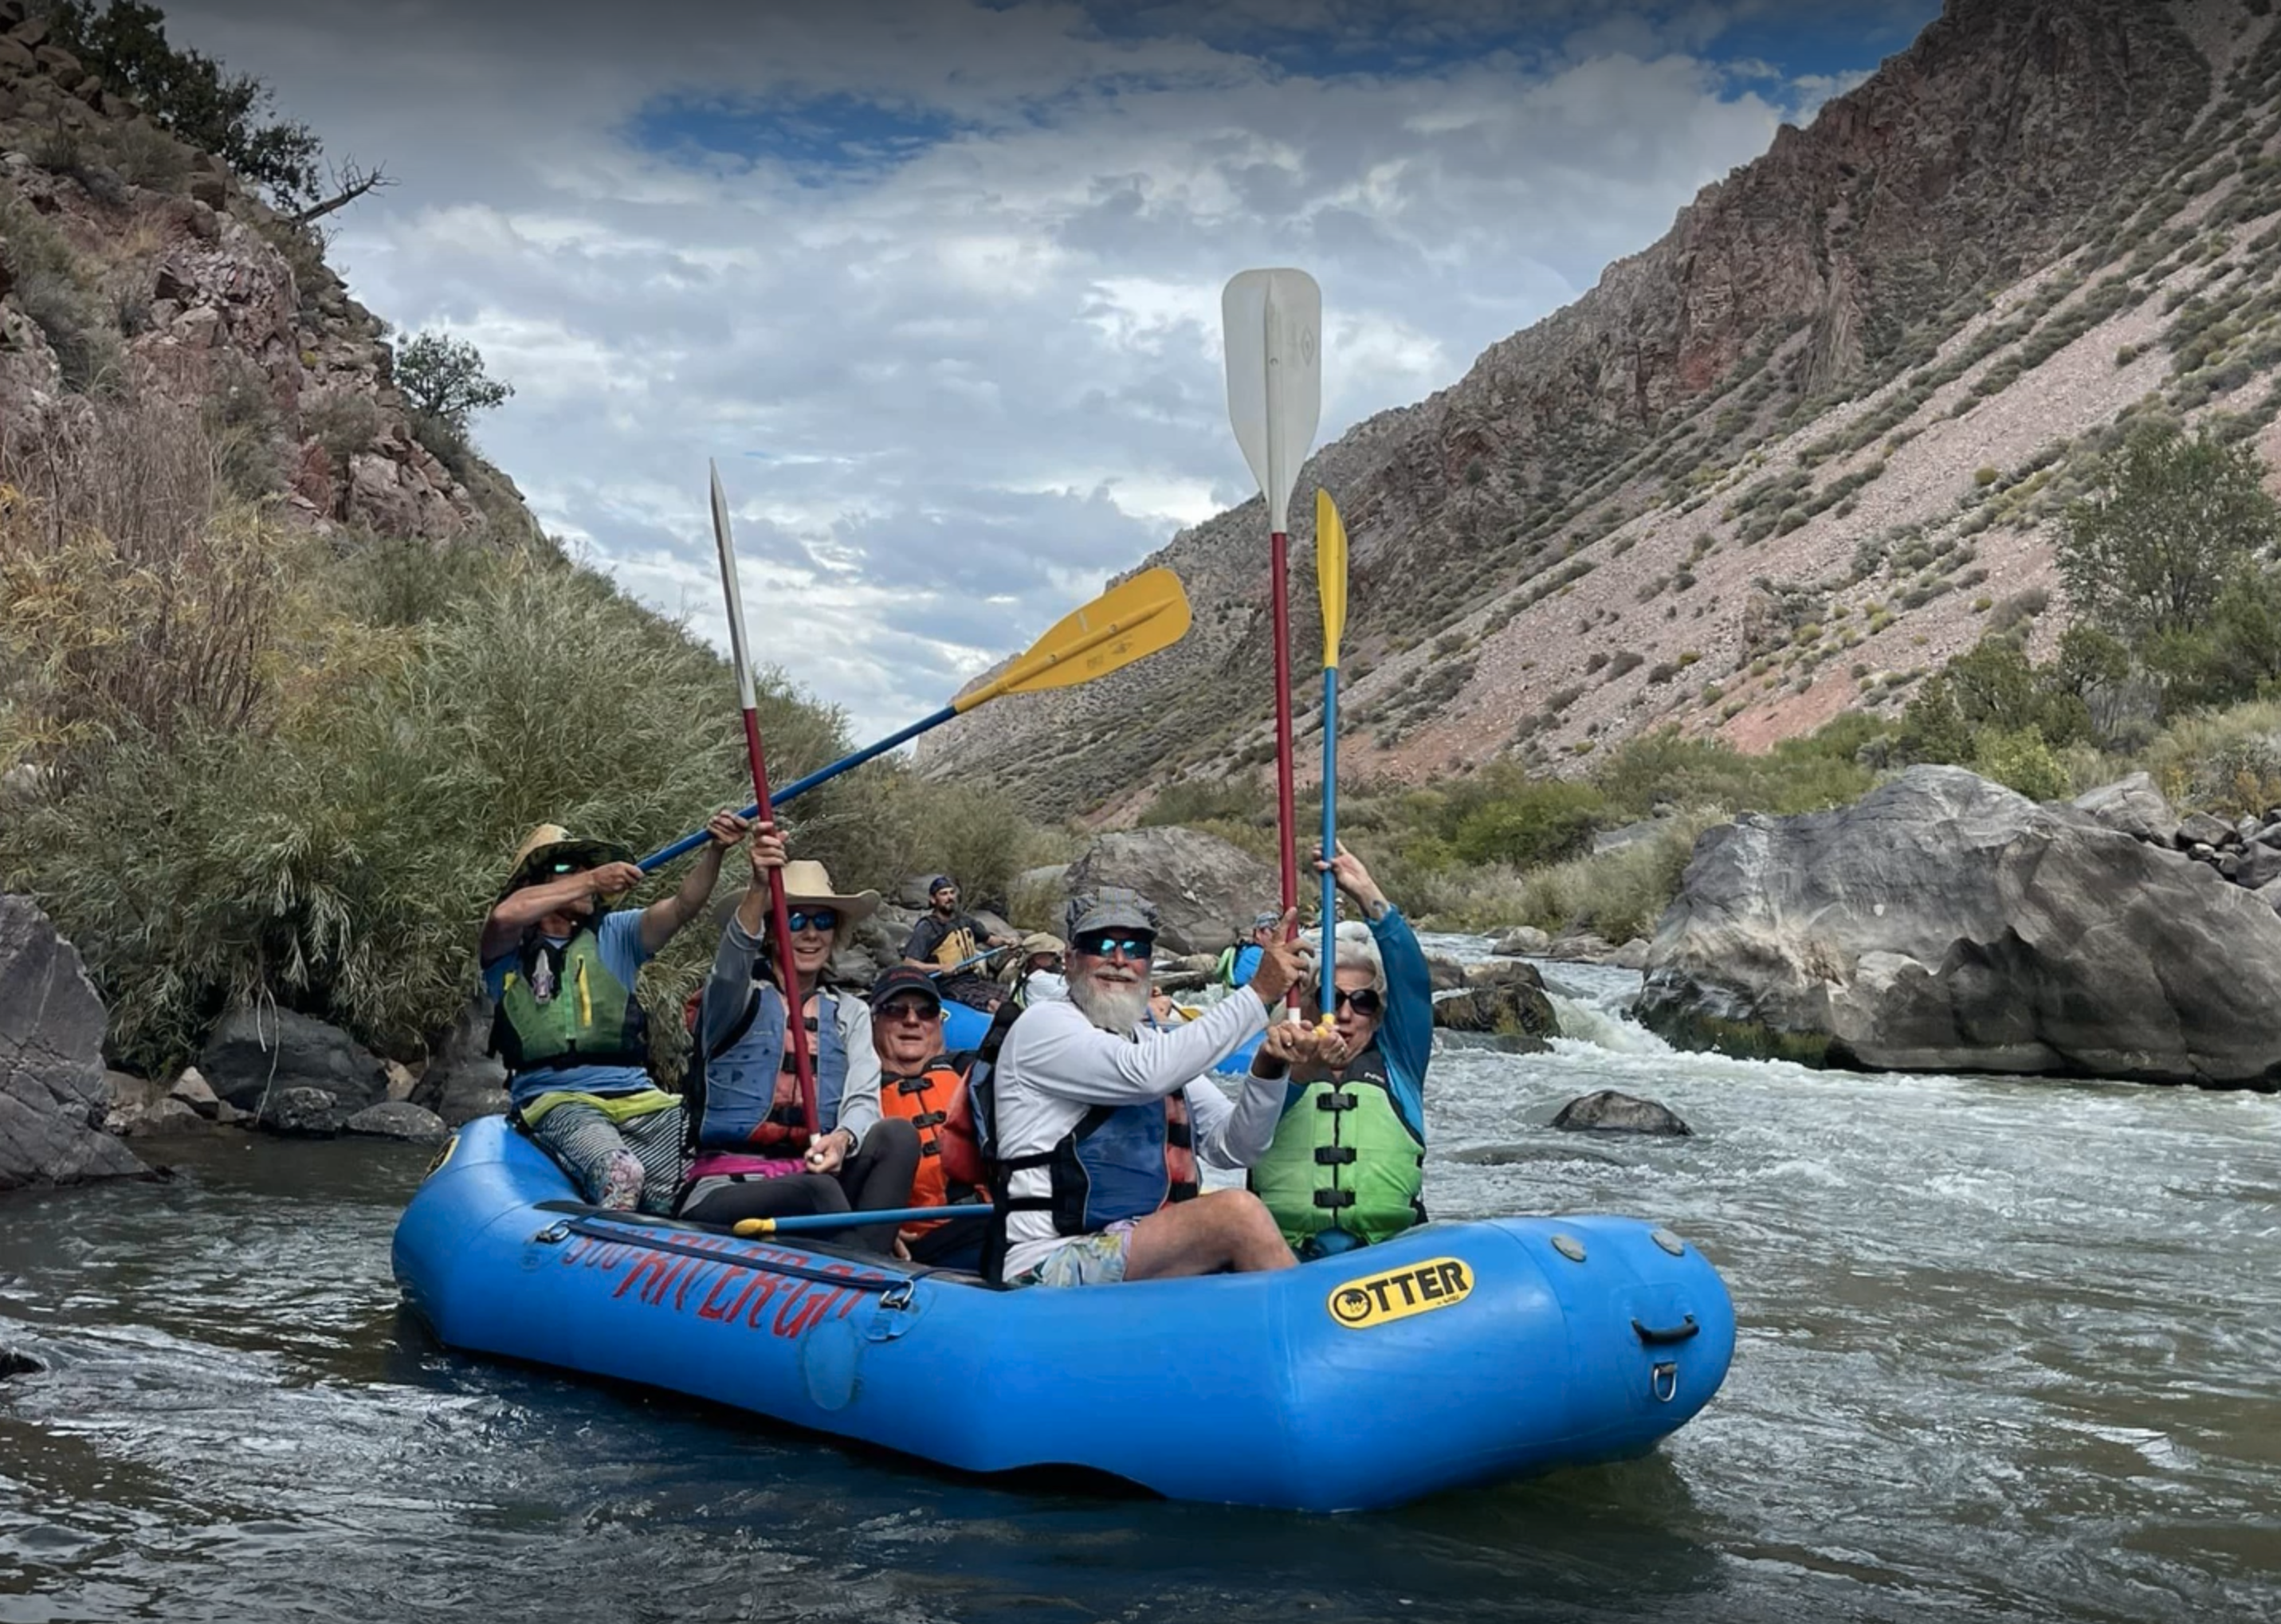 All Inclusive Motorhome Club day trip rafting on the Colorado River